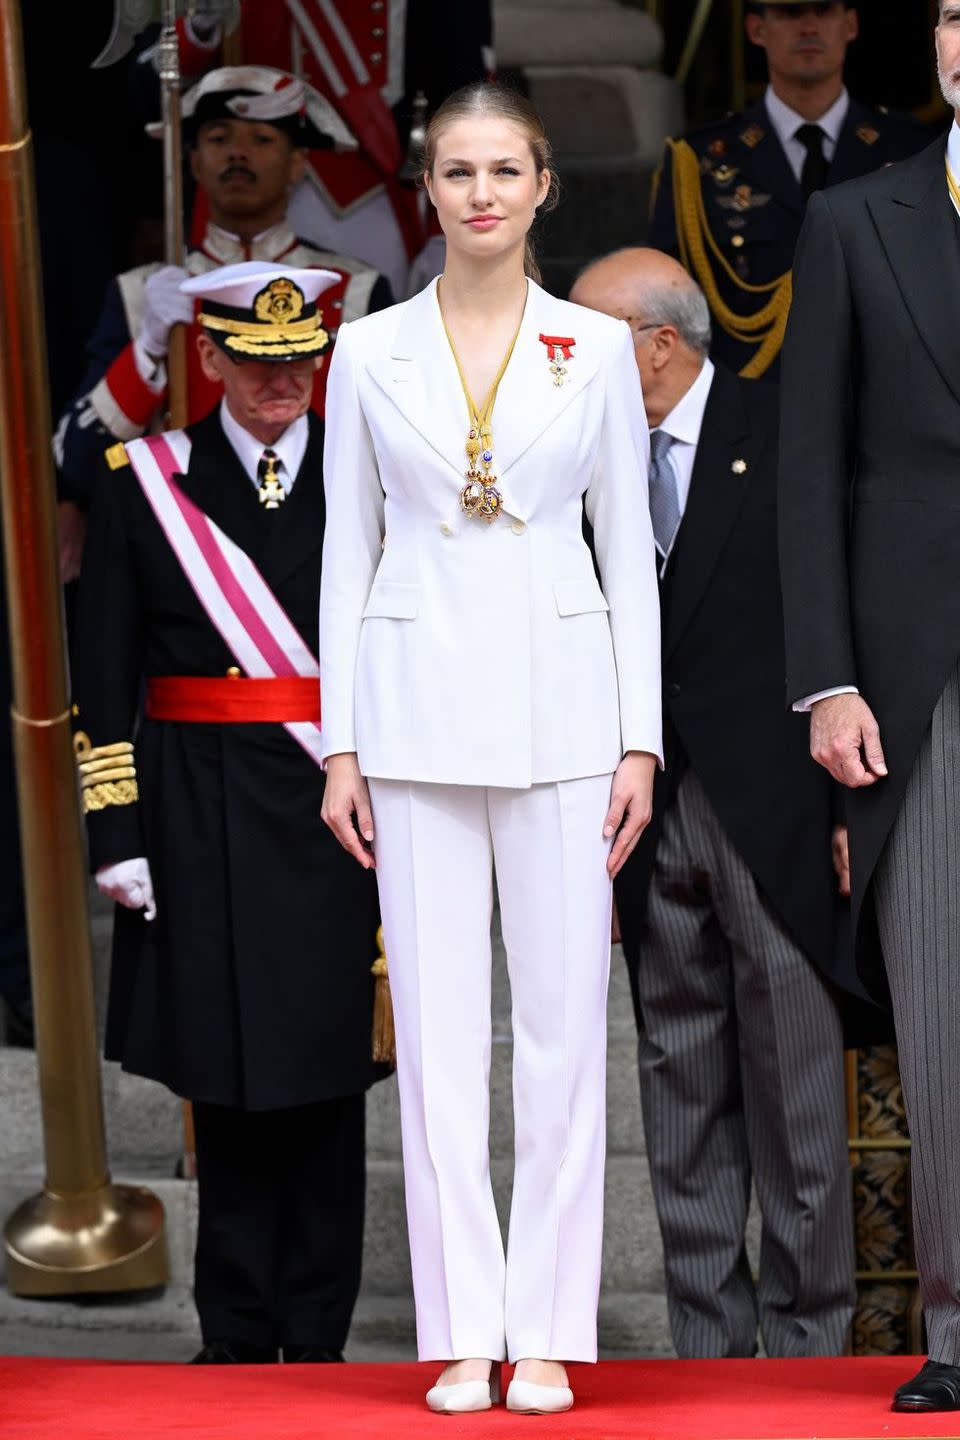 a woman in a white dress standing next to a man in a military uniform